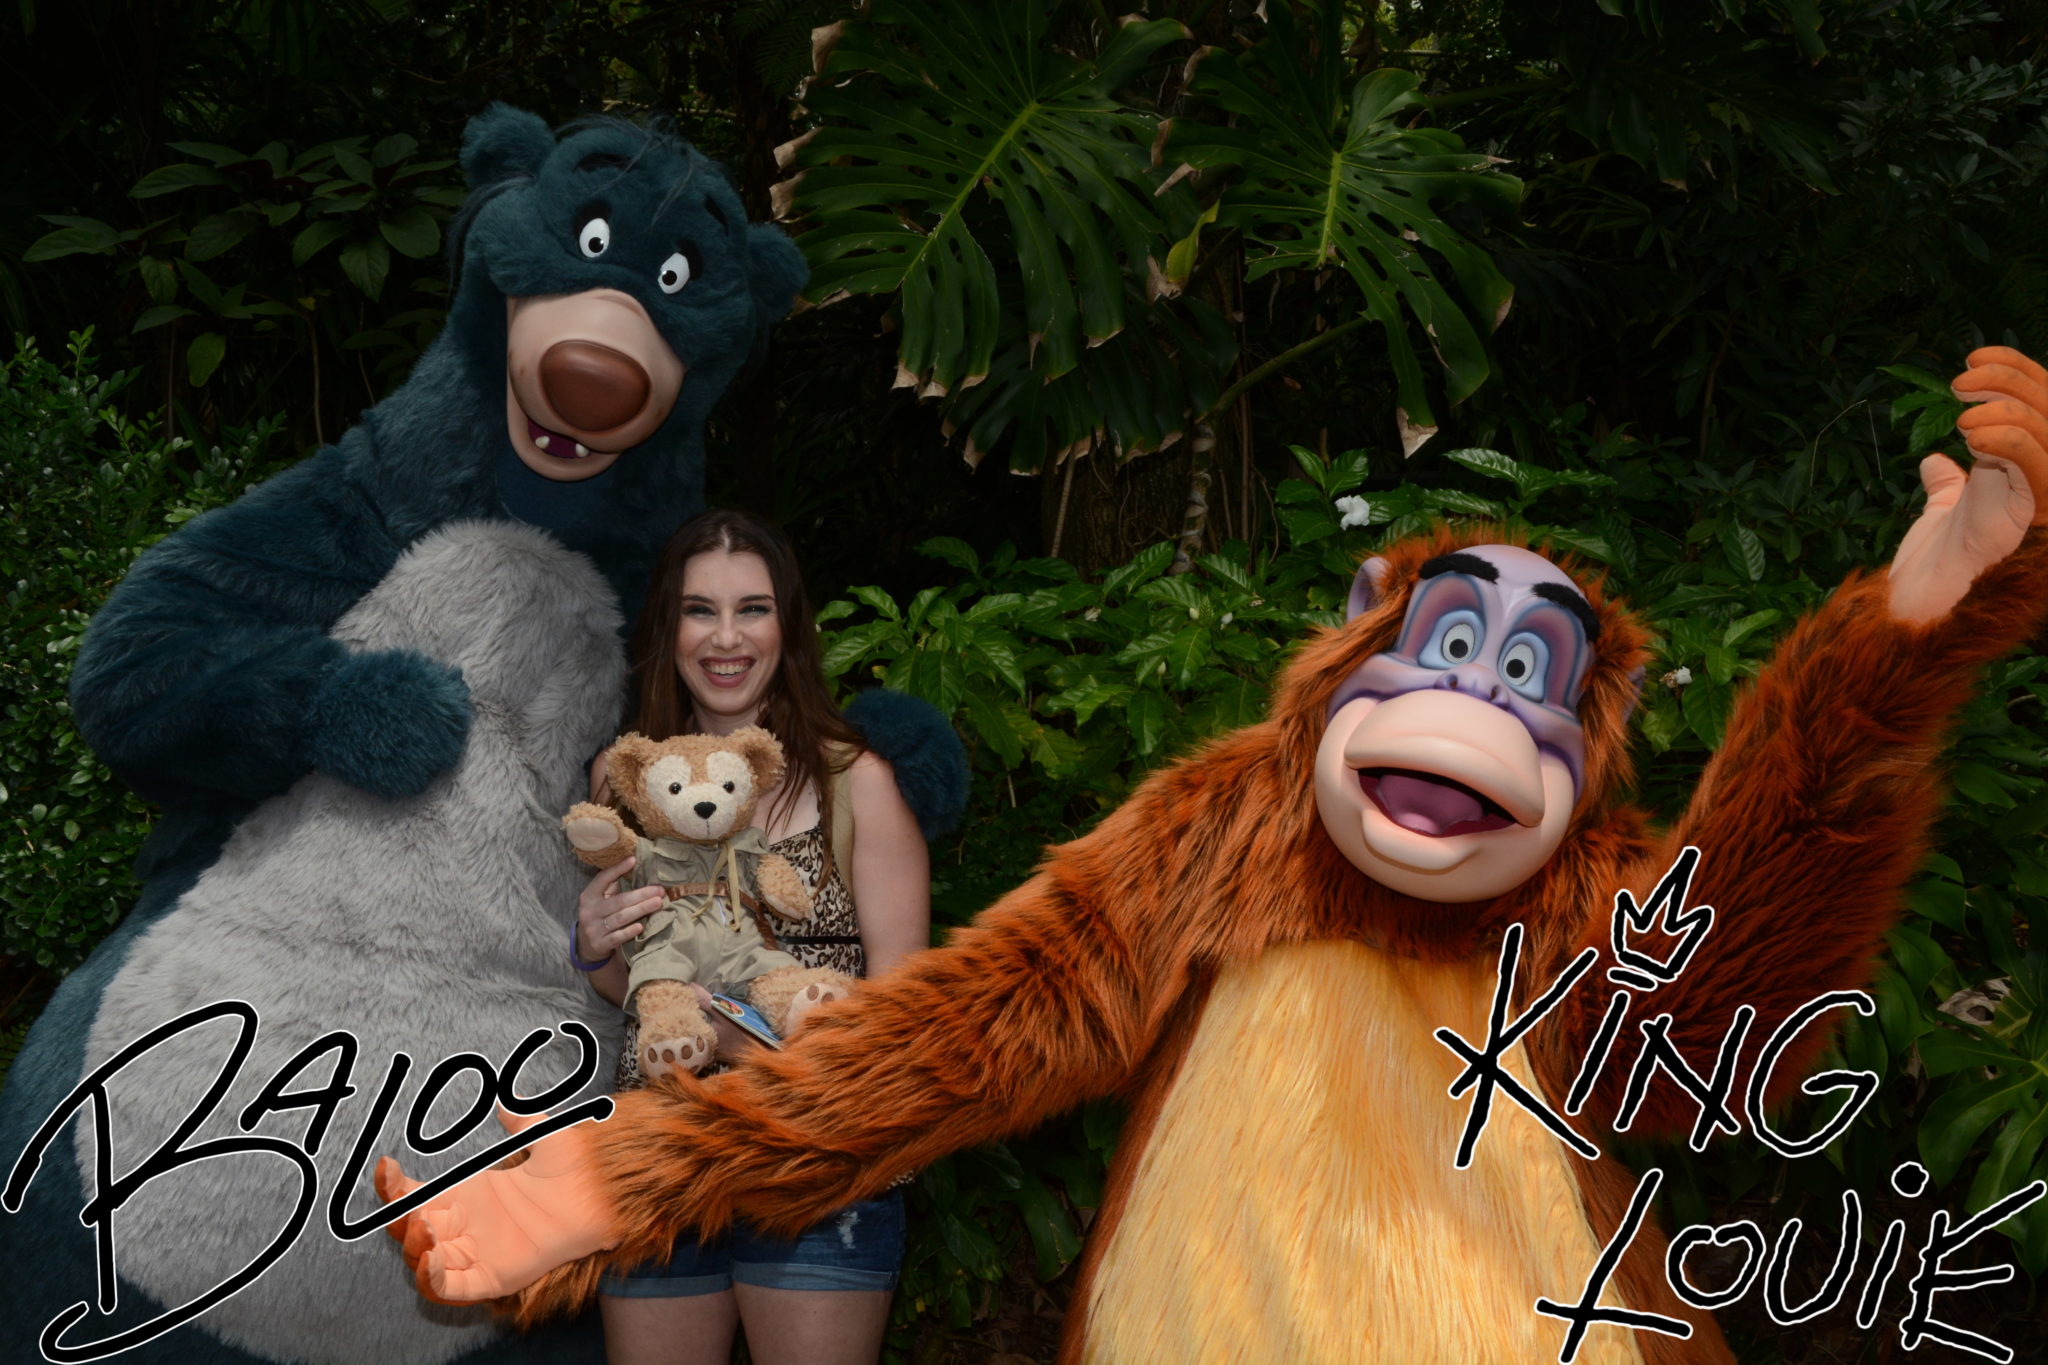 Baloo and Louie out for Animal Kingdom's Anniversary.